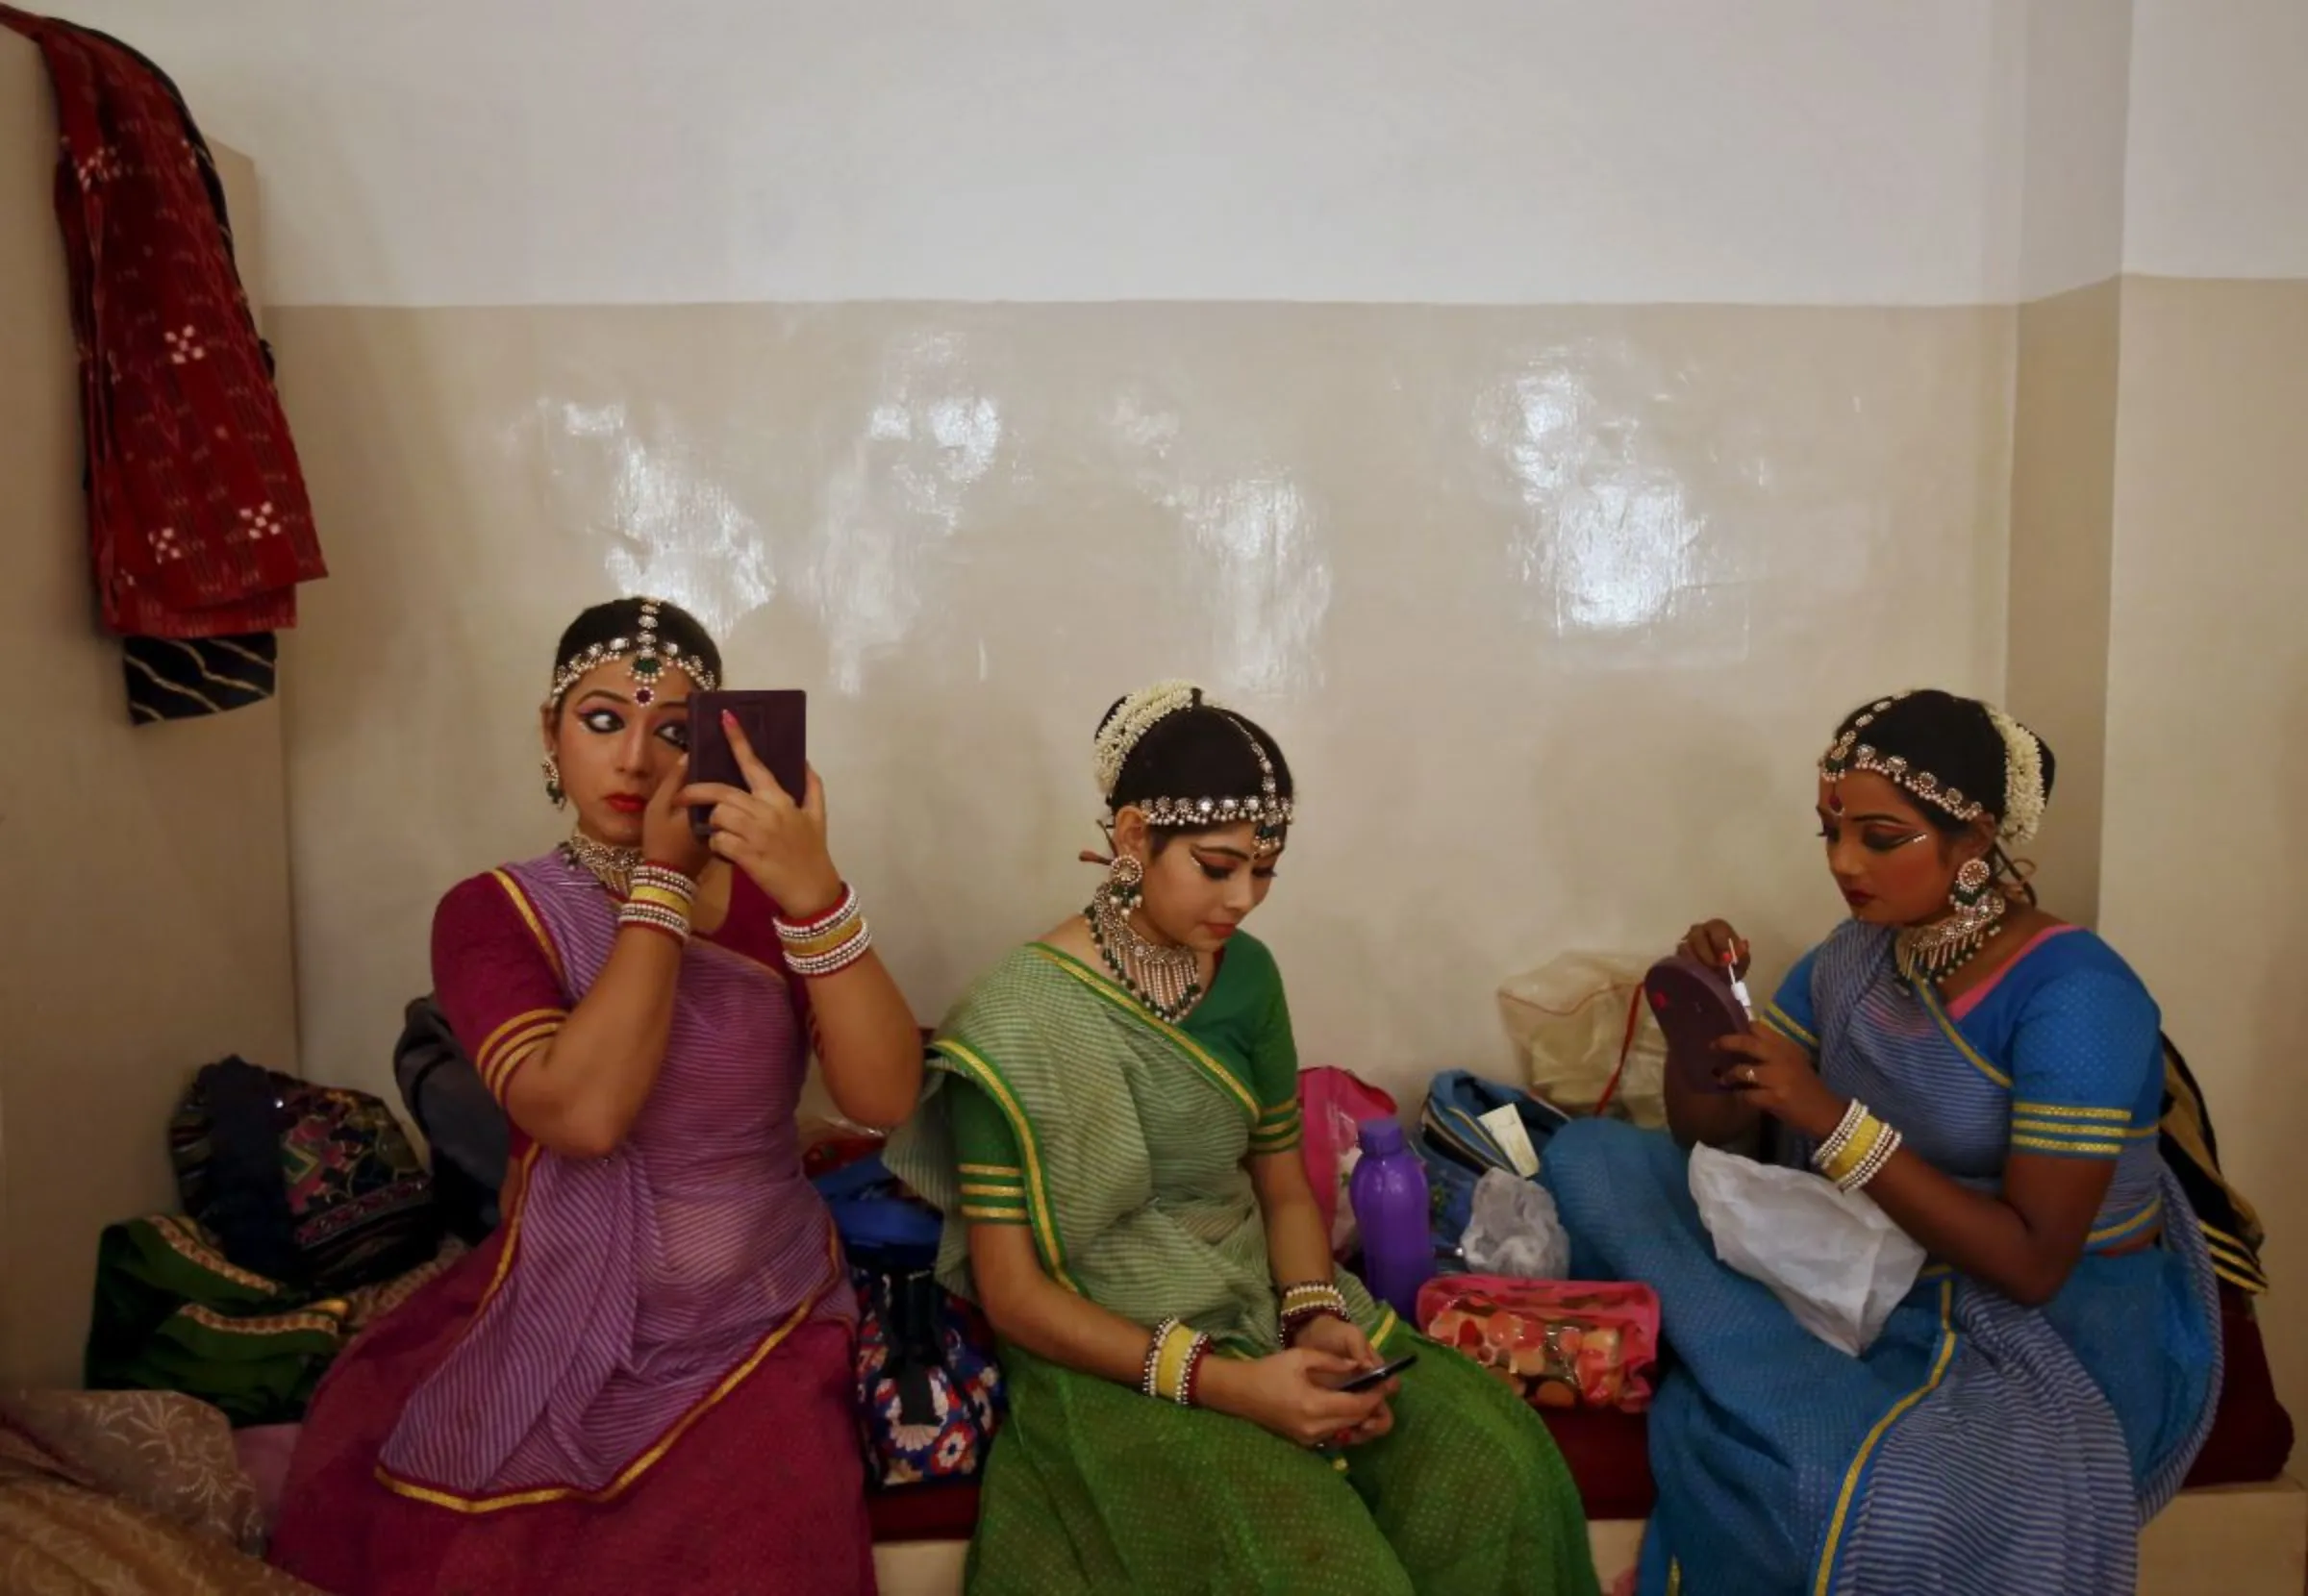 Indian artists sit backstage before their performance, in New Delhi, India, September 4, 2015. REUTERS/Anindito Mukherjee